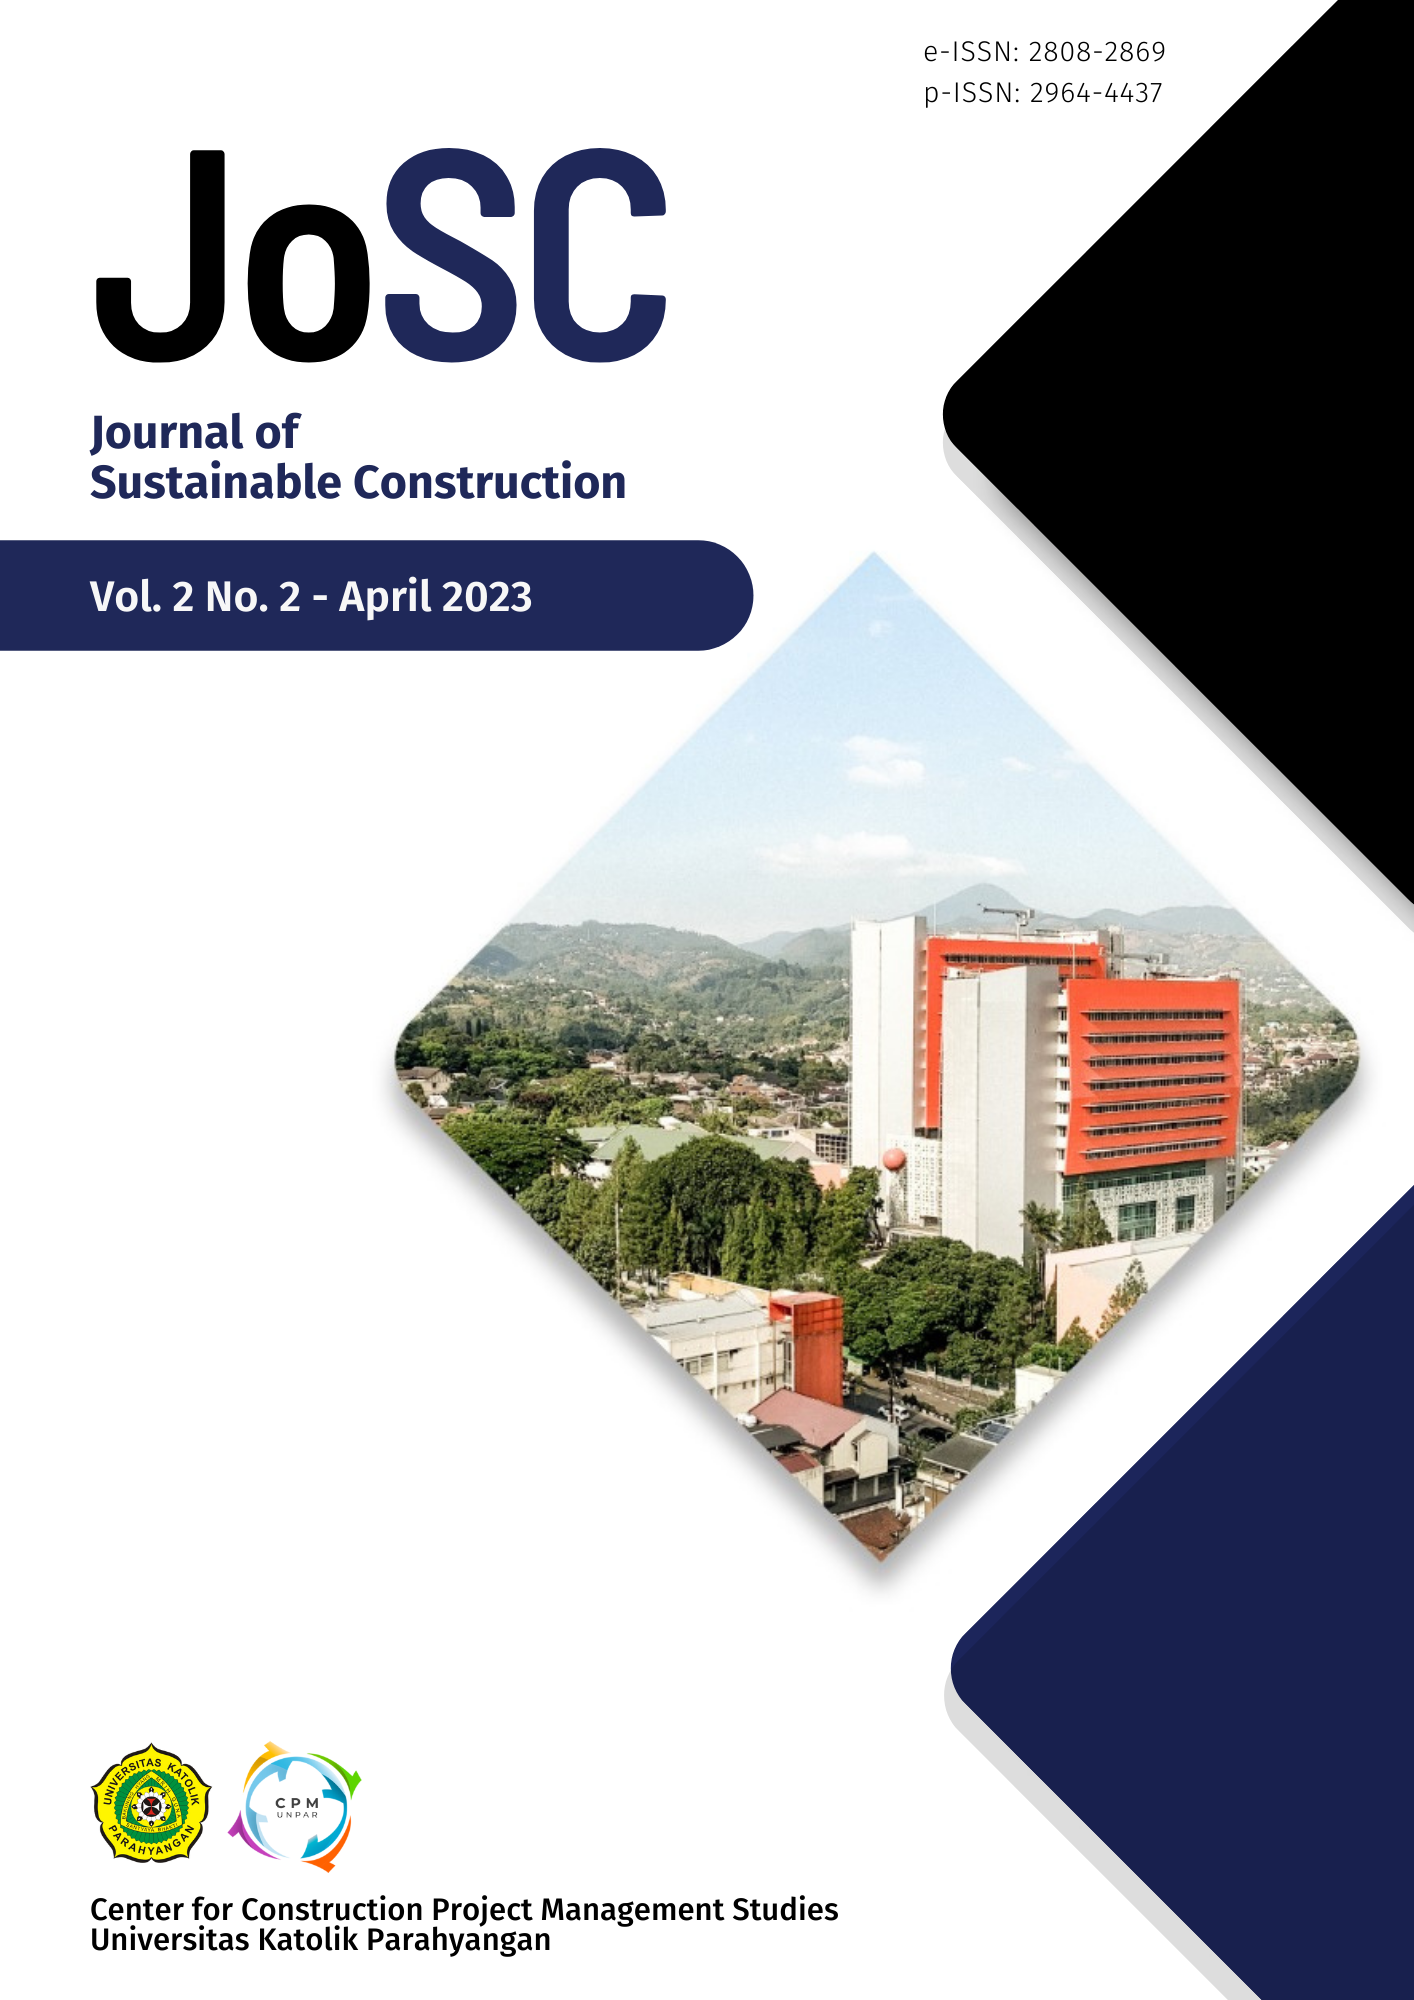 					View Vol. 2 No. 2 (2023): Journal of Sustainable Construction
				